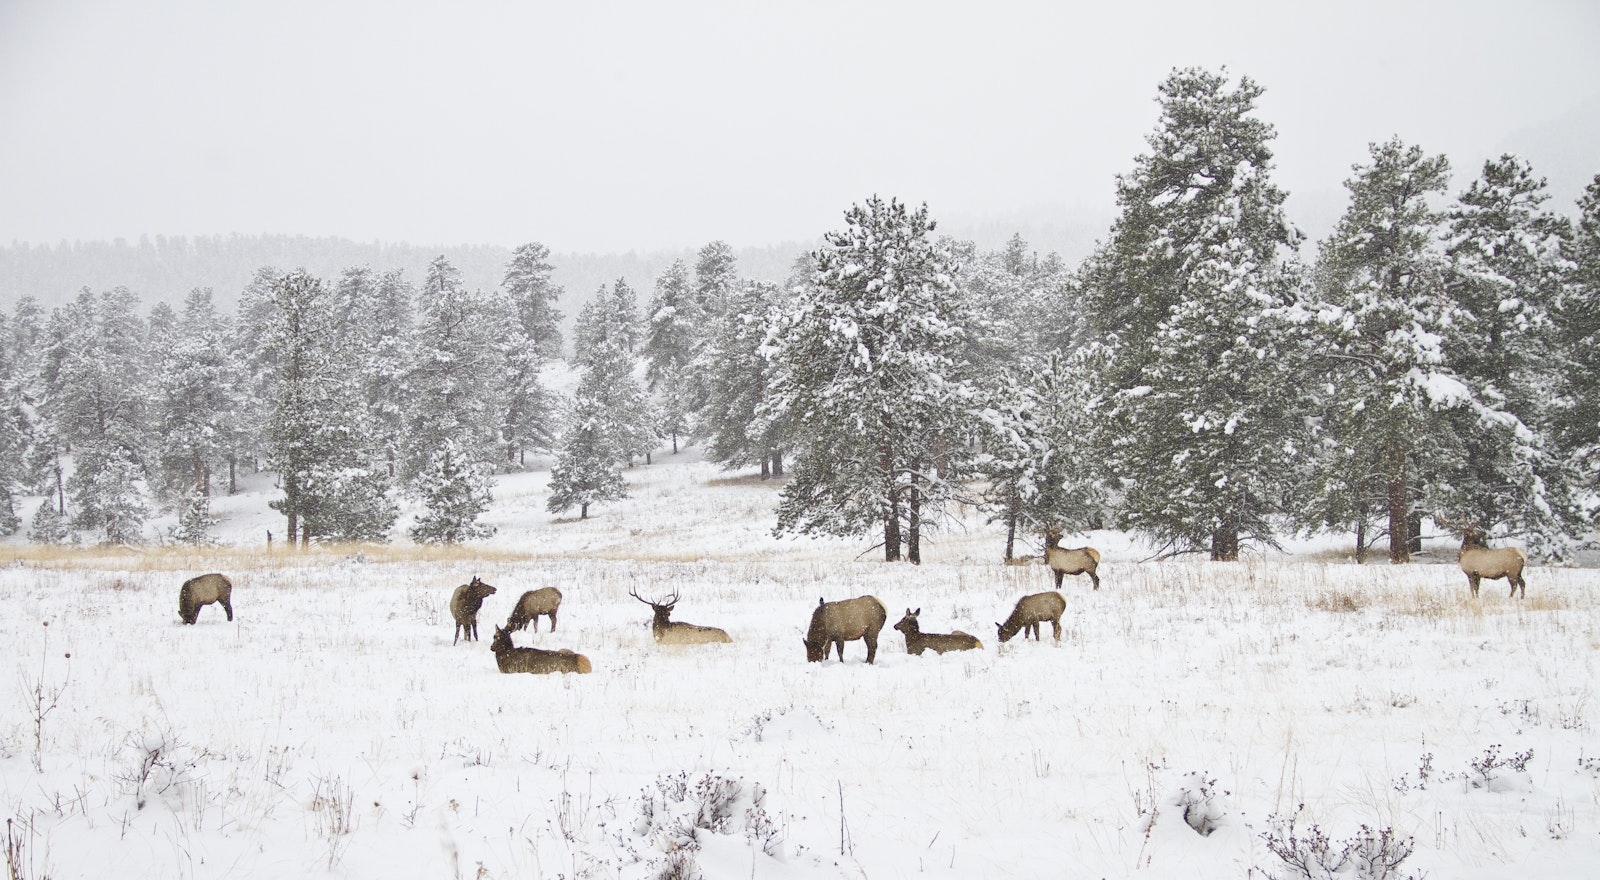 A snowy landscape with deer lounging in a field